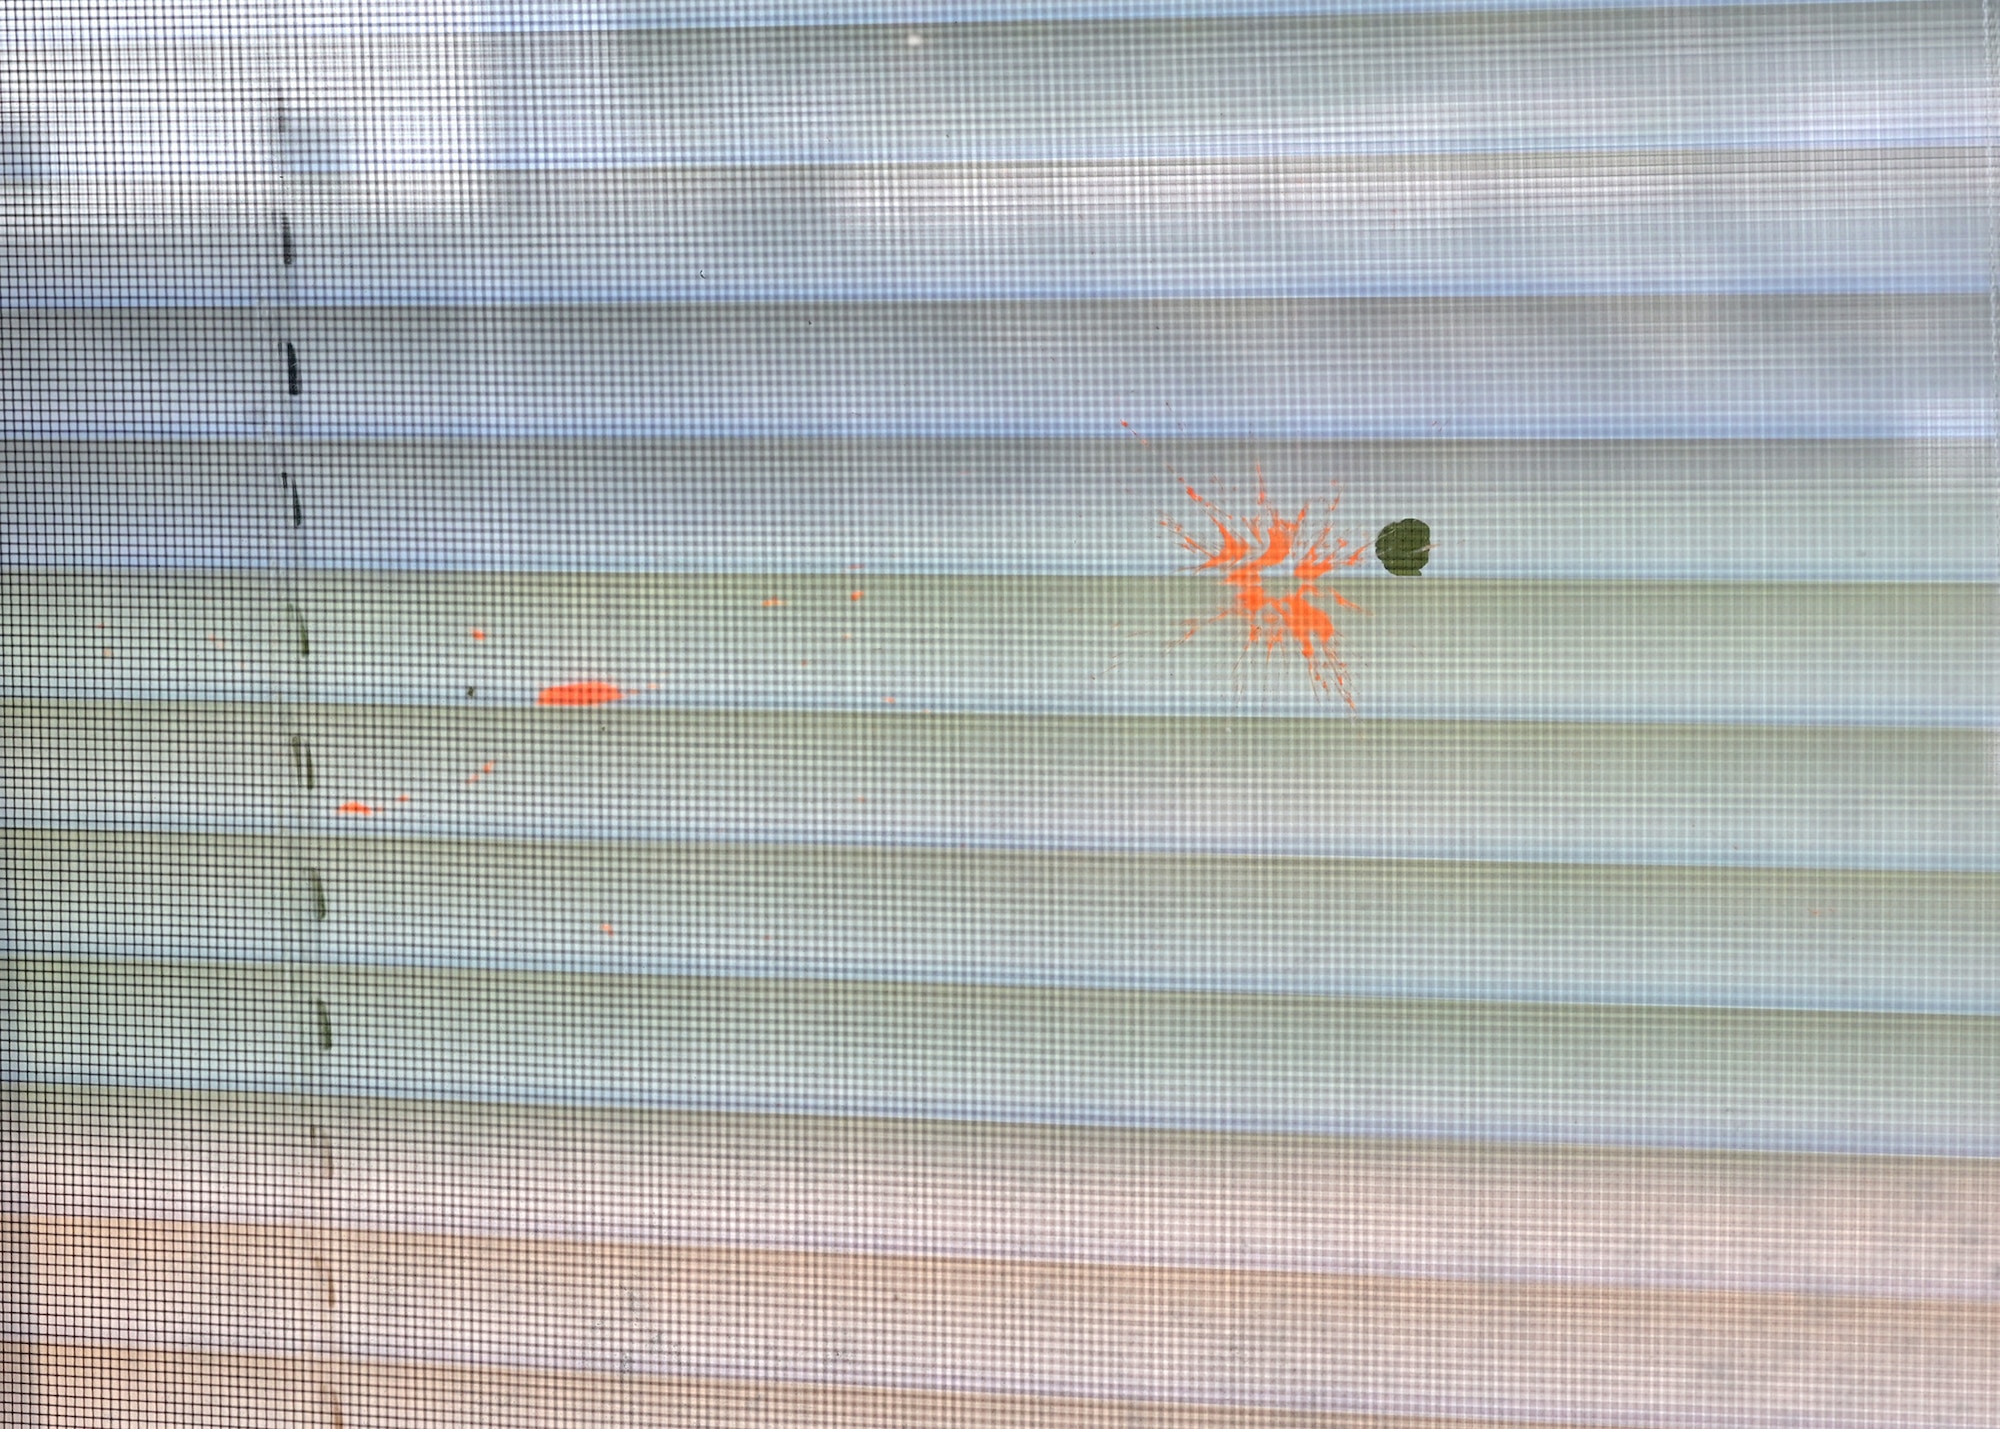 A simunition round explodes against the window of a high school classroom.